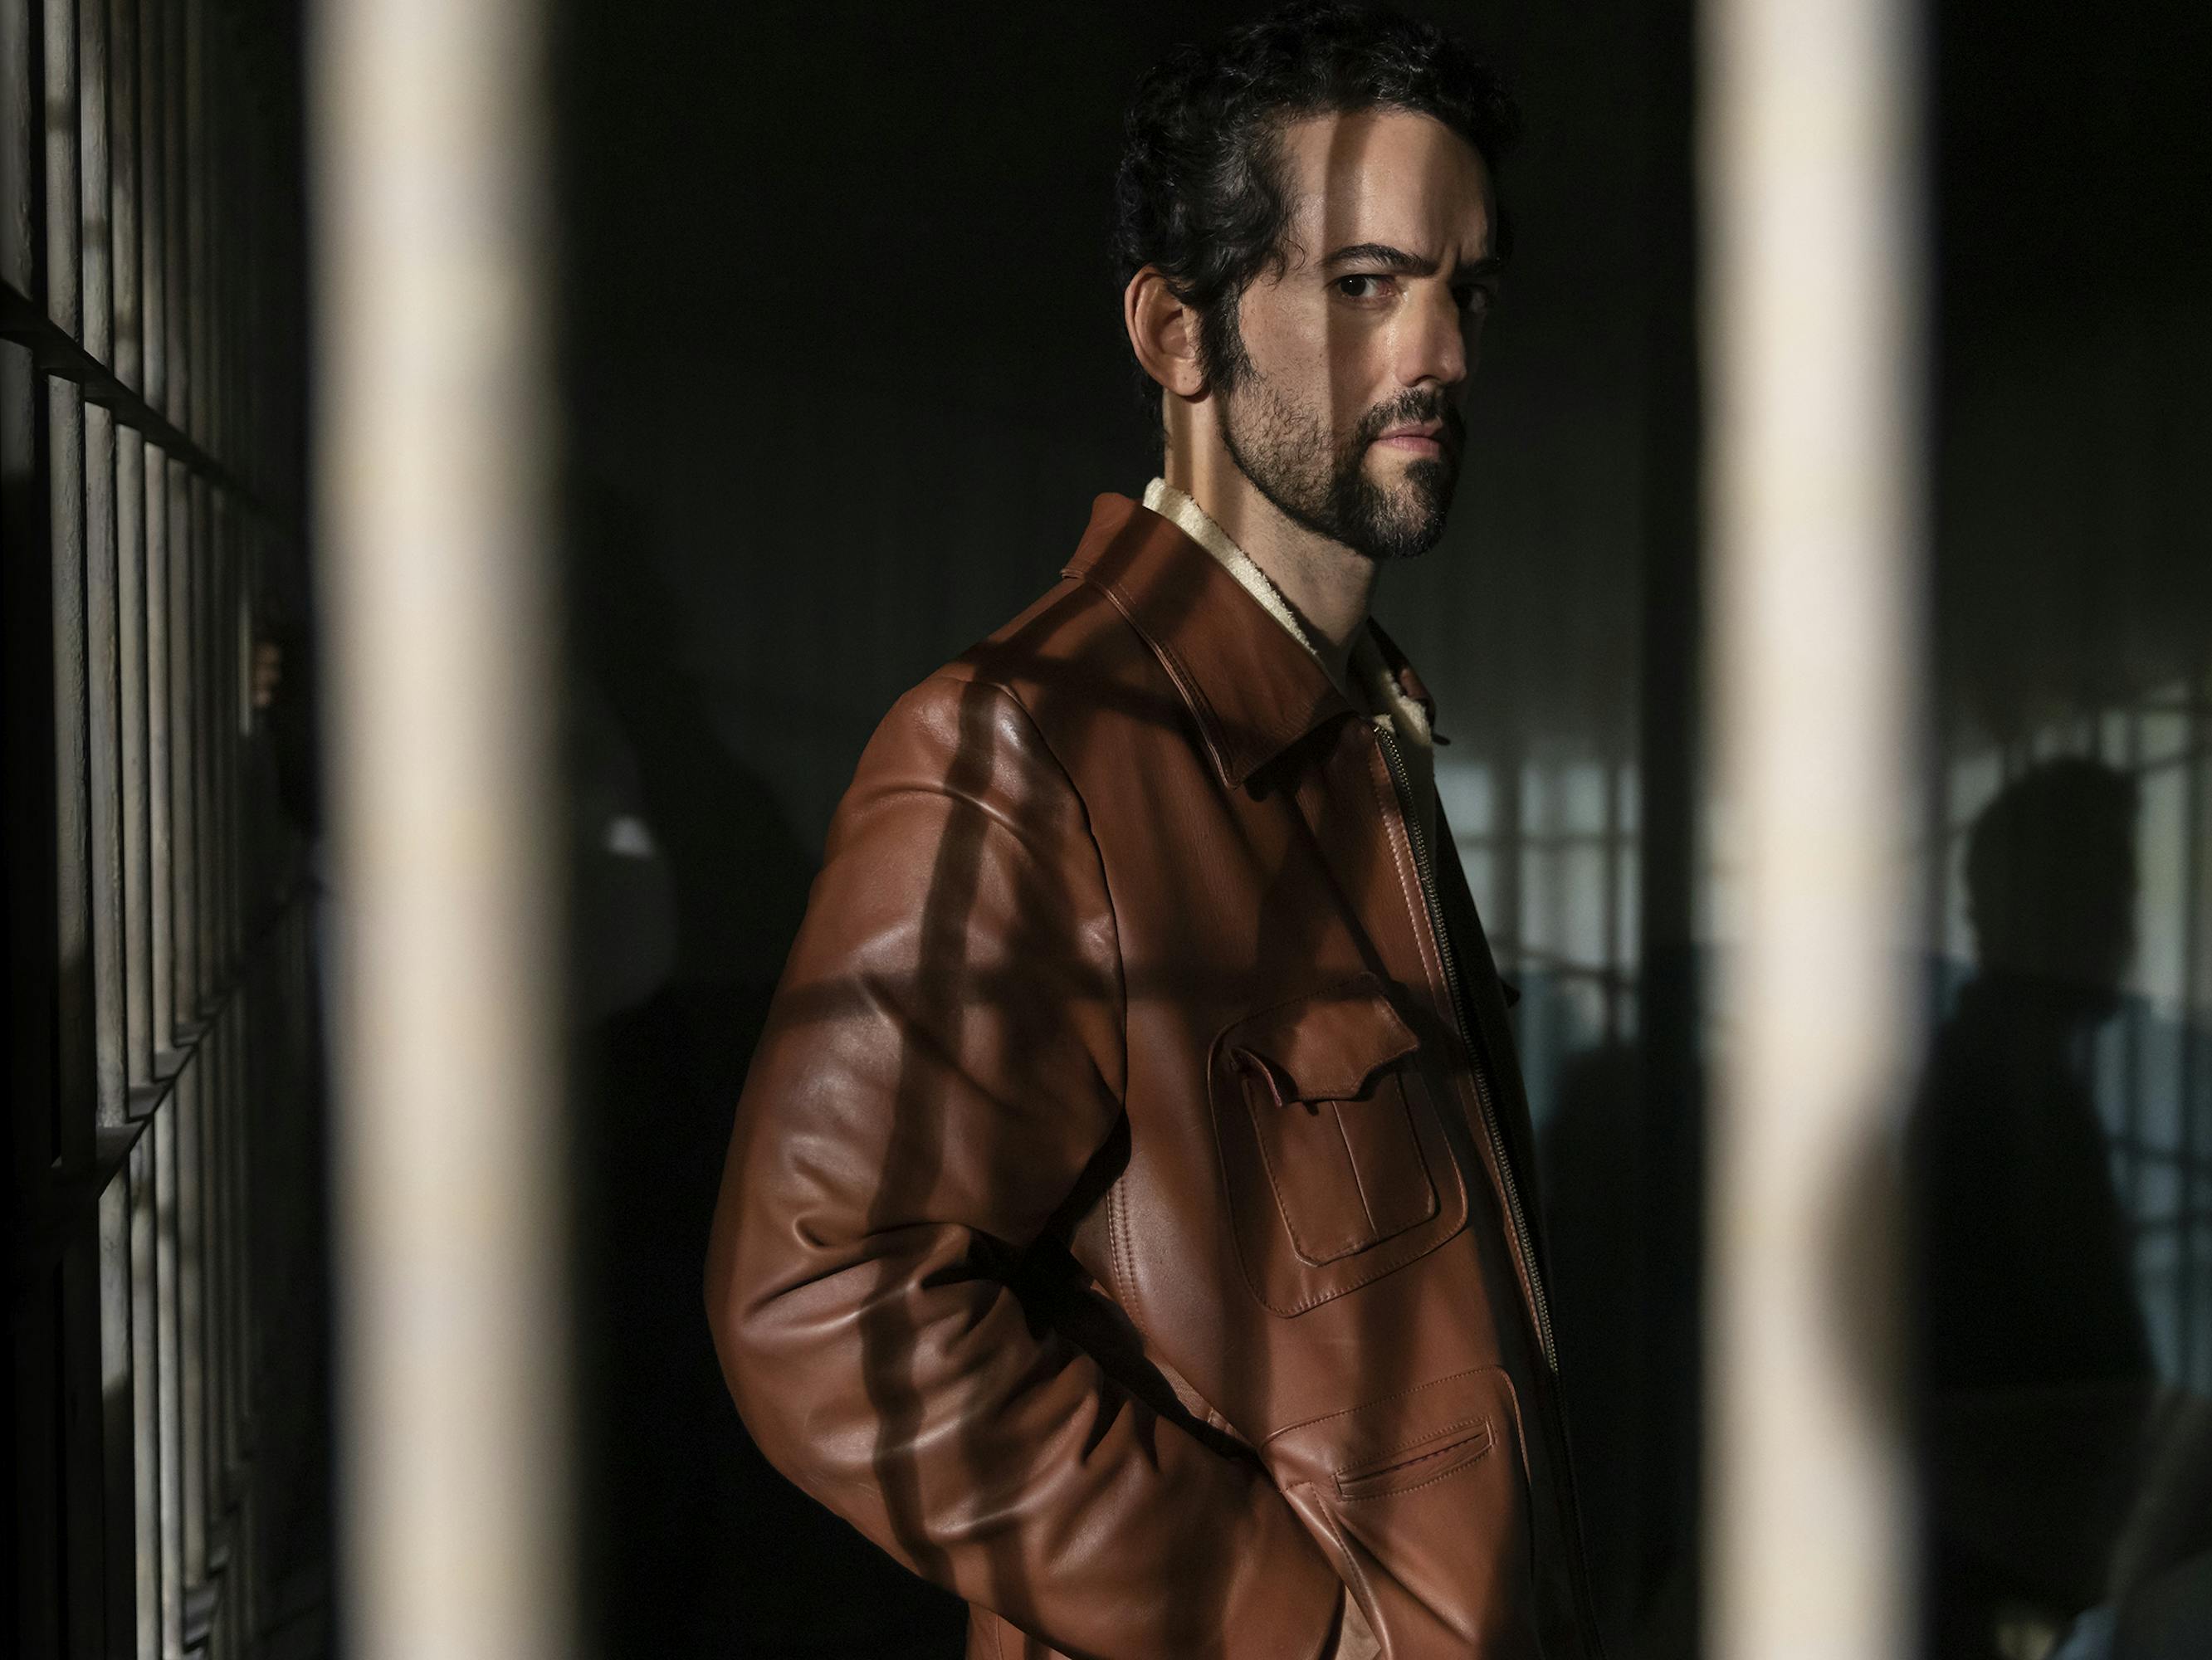 Belascoarán (Luis Gerardo Méndez) wears a brown leather jacket in this shadowy picture.